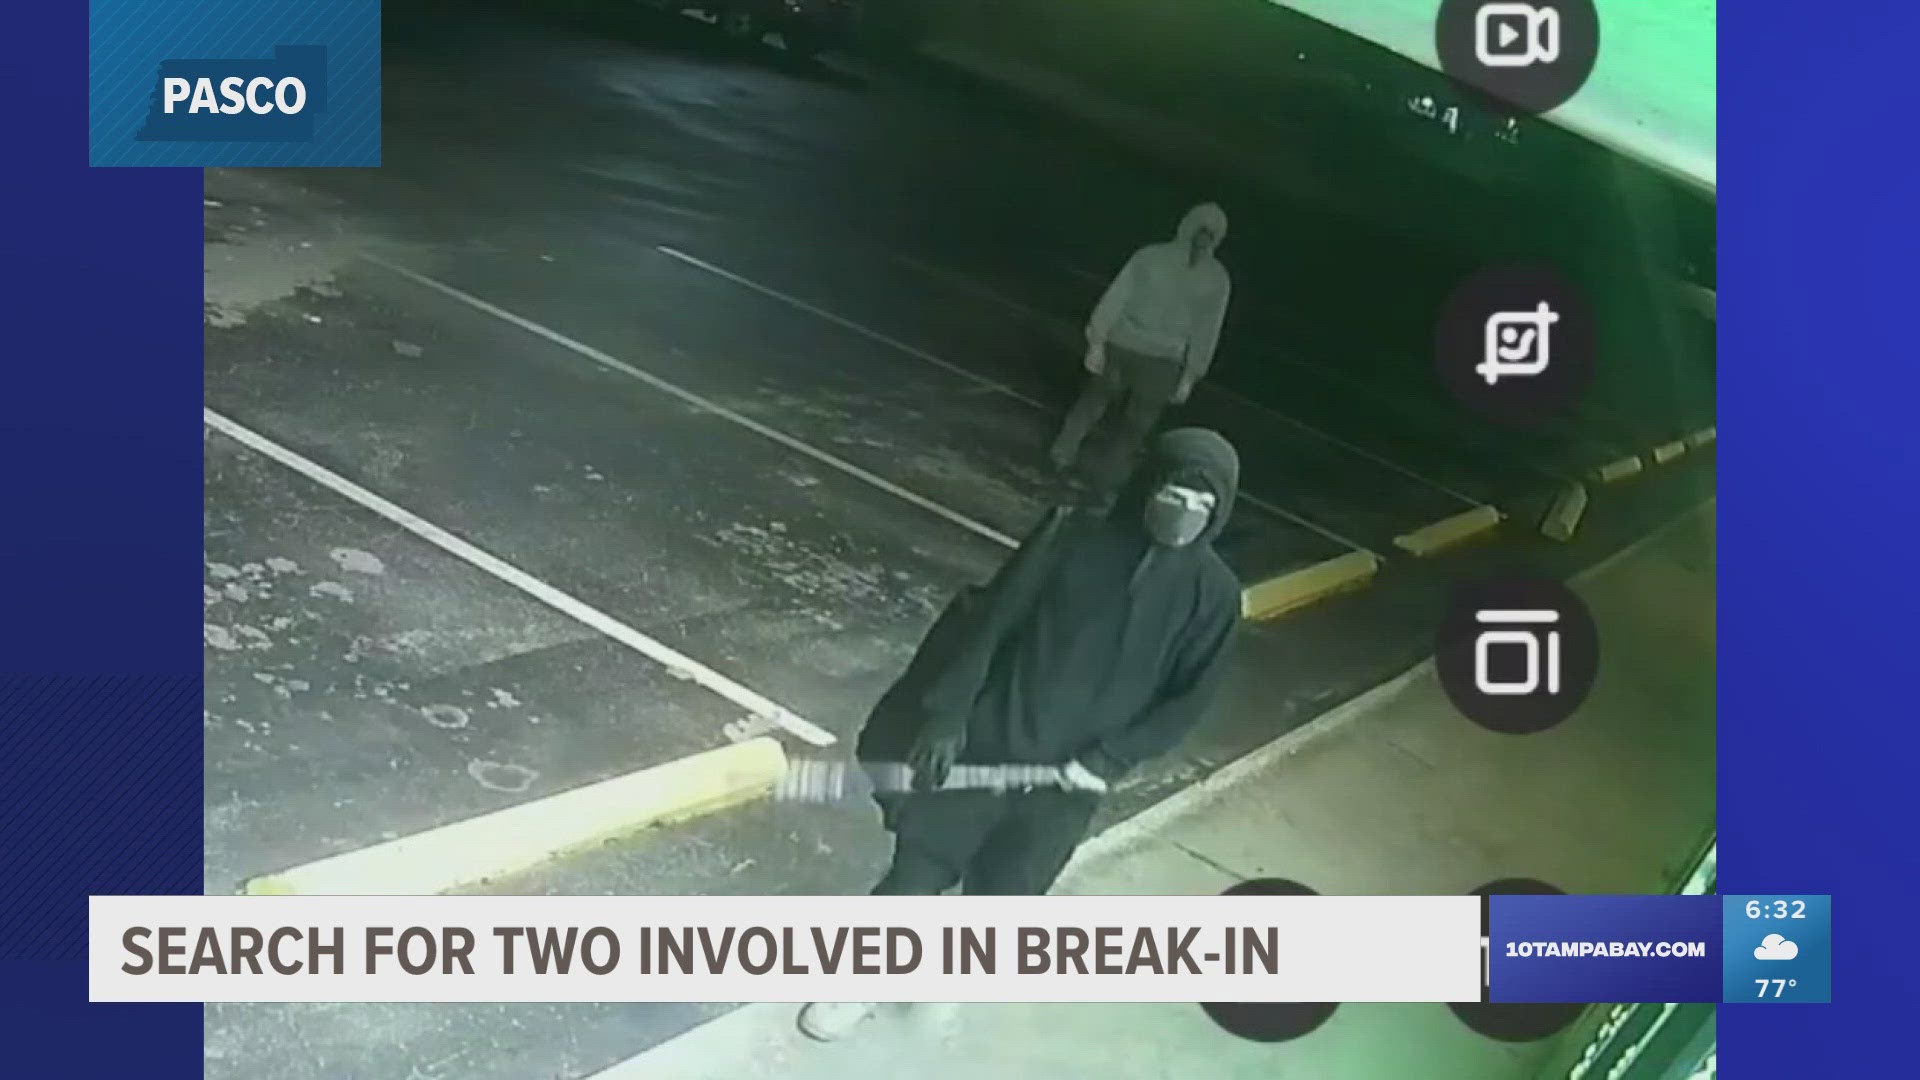 Two people wearing dark clothing, masks and gloves broke in and damaged a Zephyrhills business.